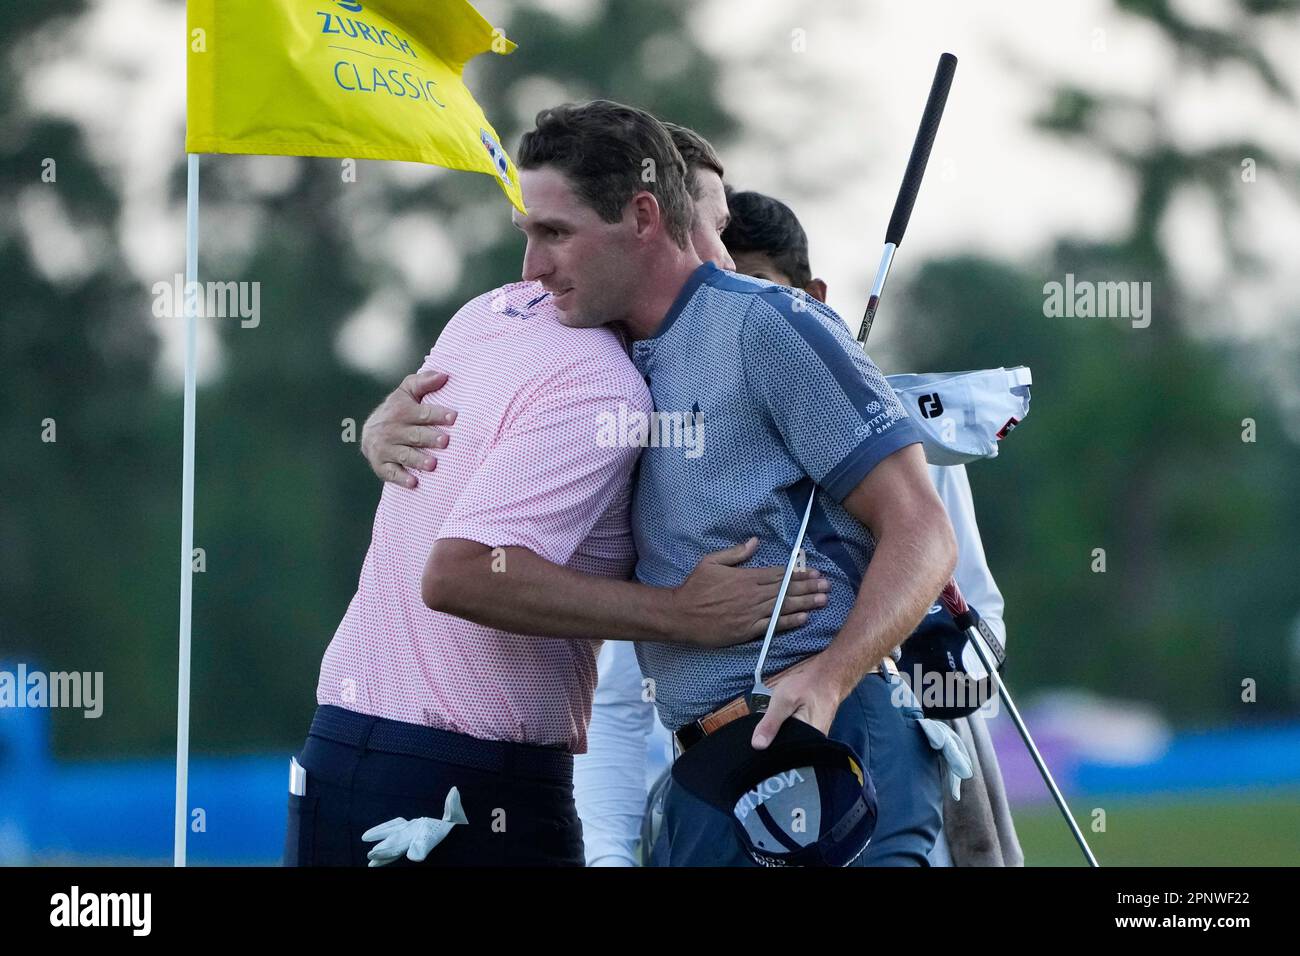 Sean OHair, left, greets teammate Brandon Matthews after finishing the day on the 18th green during the first round of the PGA Zurich Classic golf tournament at TPC Louisiana in Avondale, La.,